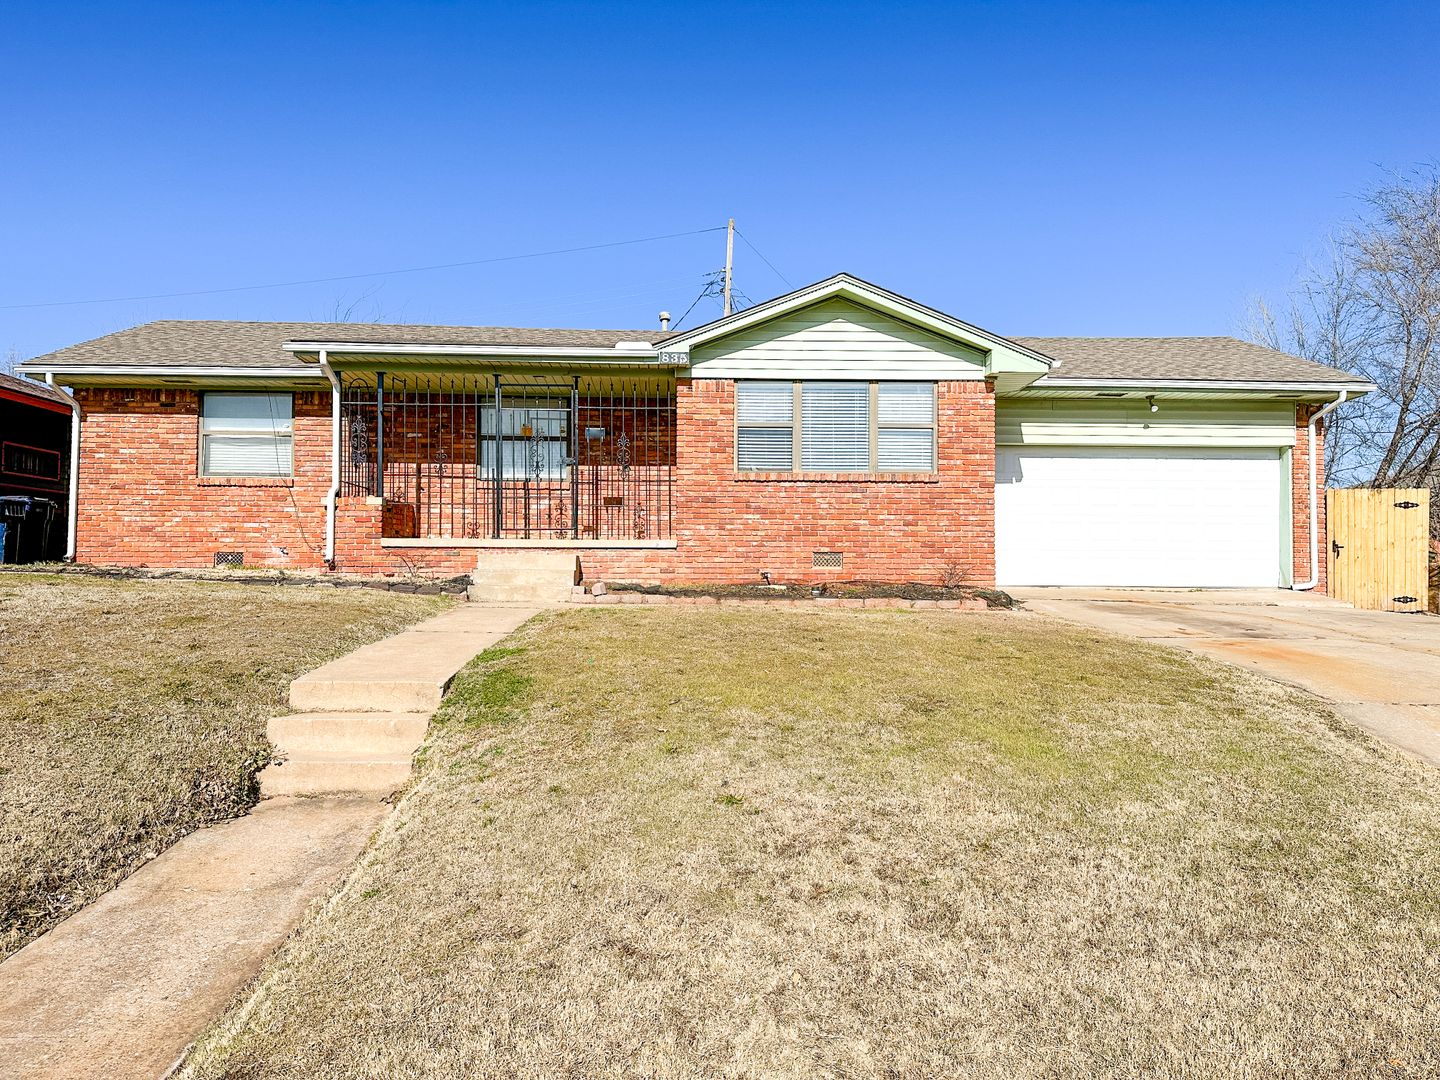 Fully Updated 3 Bed/1 Bath with a two car attached garage!